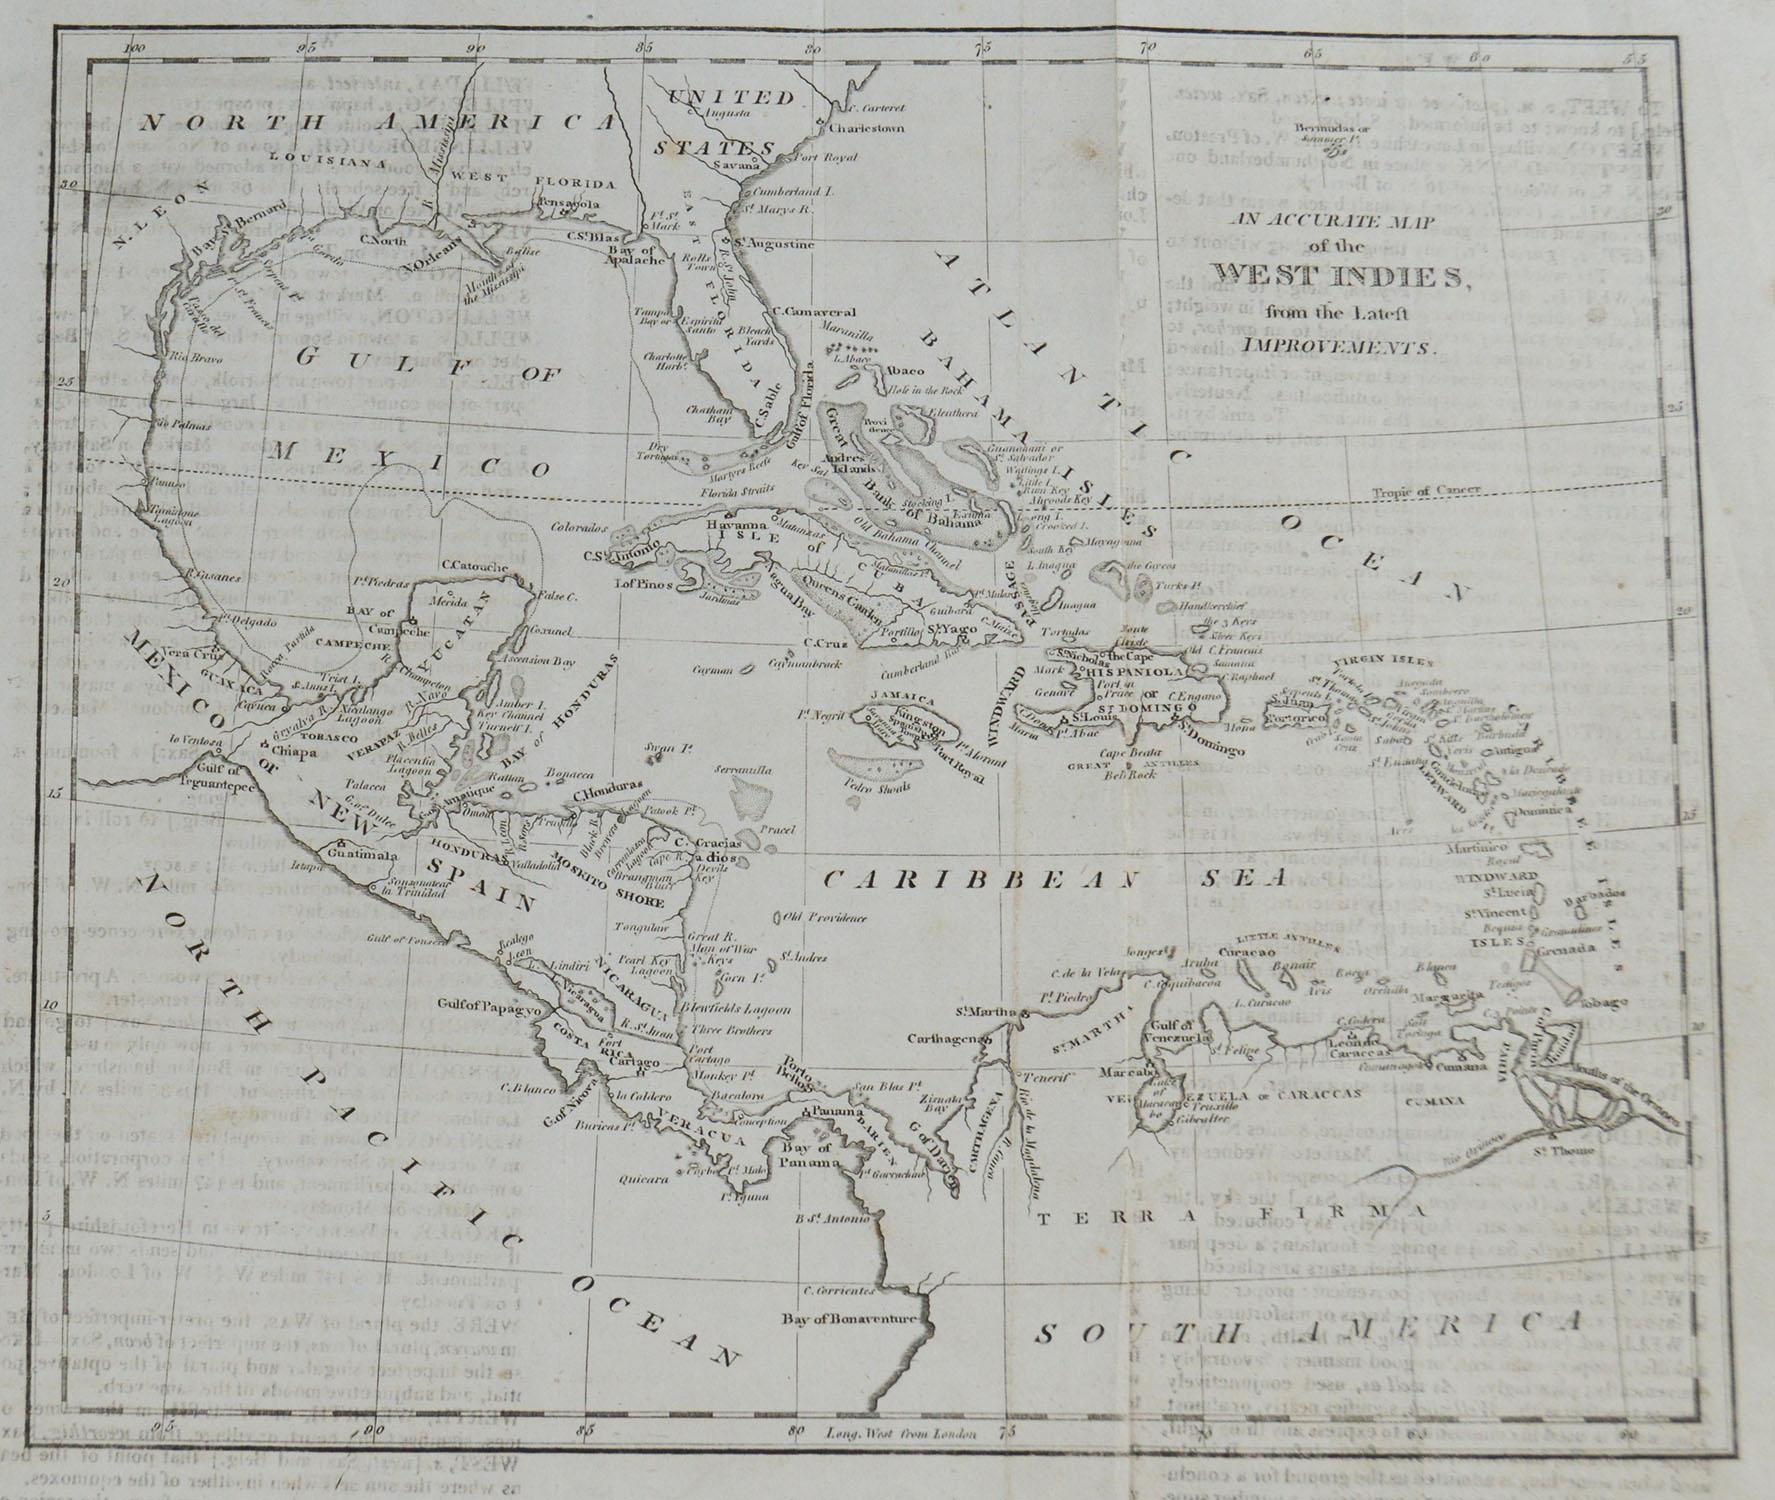 Great map of The Caribbean showing Florida, Bahamas etc.

Copper plate engraving

Published in The Barclays Dictionary, circa 1800.

Unframed

Some ghost text visible on map.

 